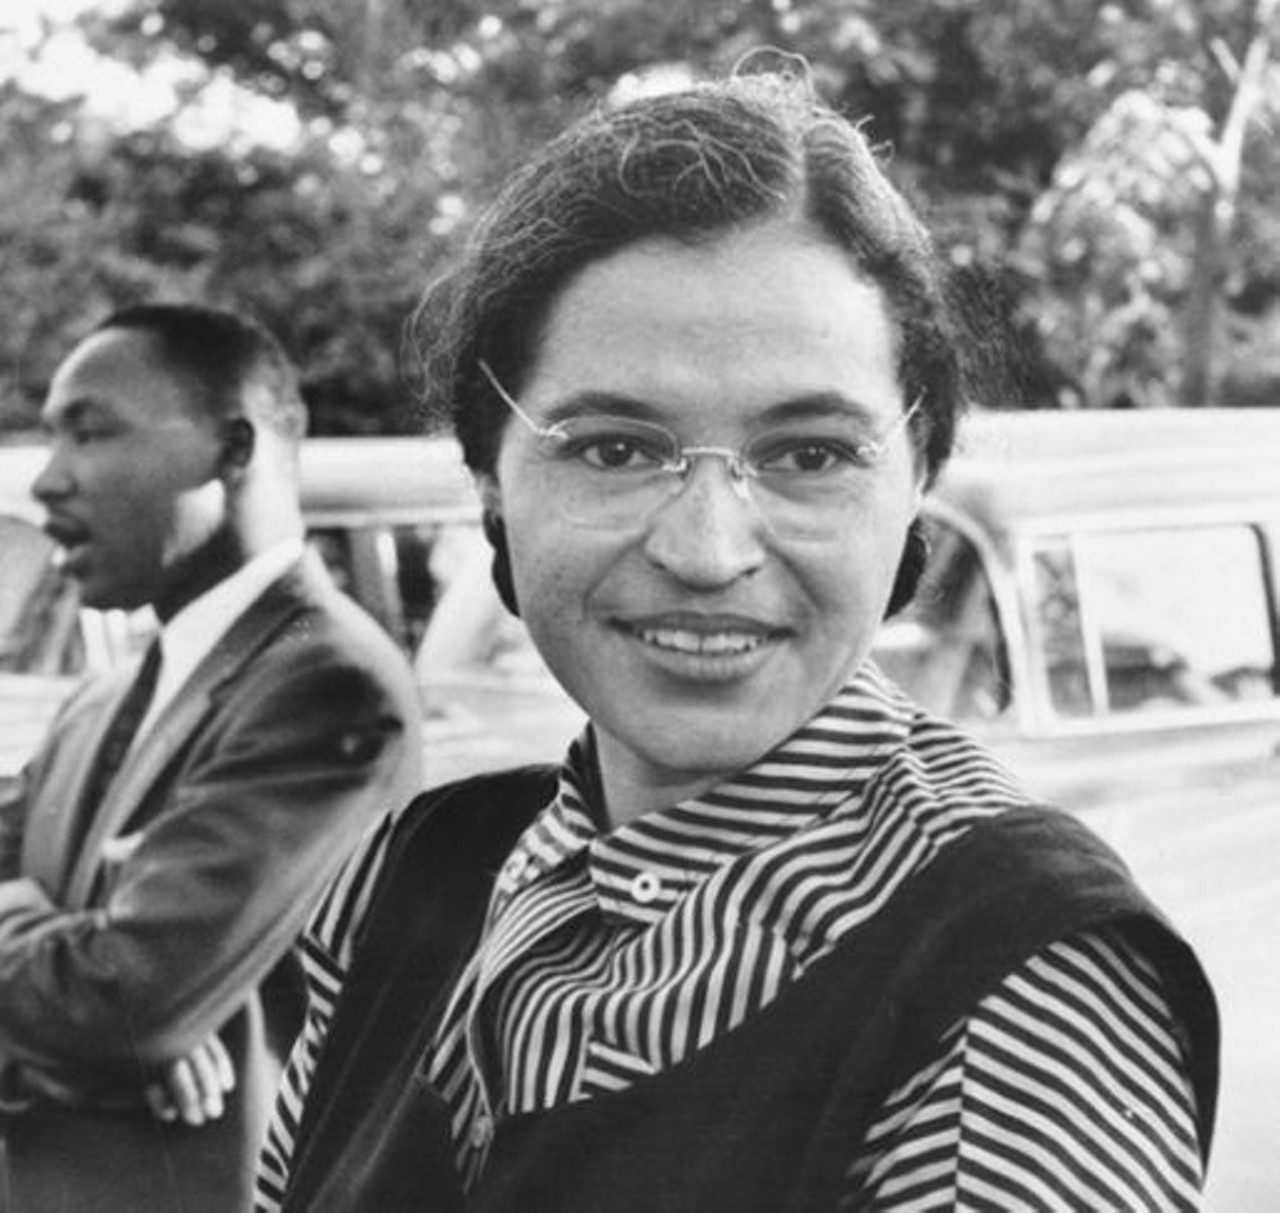 Rosa Parks
Civil Rights activist Rosa Parks moved to Detroit in the late 1950s, following her role in the historic Montgomery bus boycott. She worked as a secretary and receptionist in the congressional office of U.S. Rep. John Conyers. Later, Parks was a board member of Planned Parenthood. Following her death in 2005, she was buried in Detroit&#146;s Woodlawn Cemetery.
Photo via National Archives and Records Administration Records of the U.S. Information Agency Record Group / Wikimedia Commons